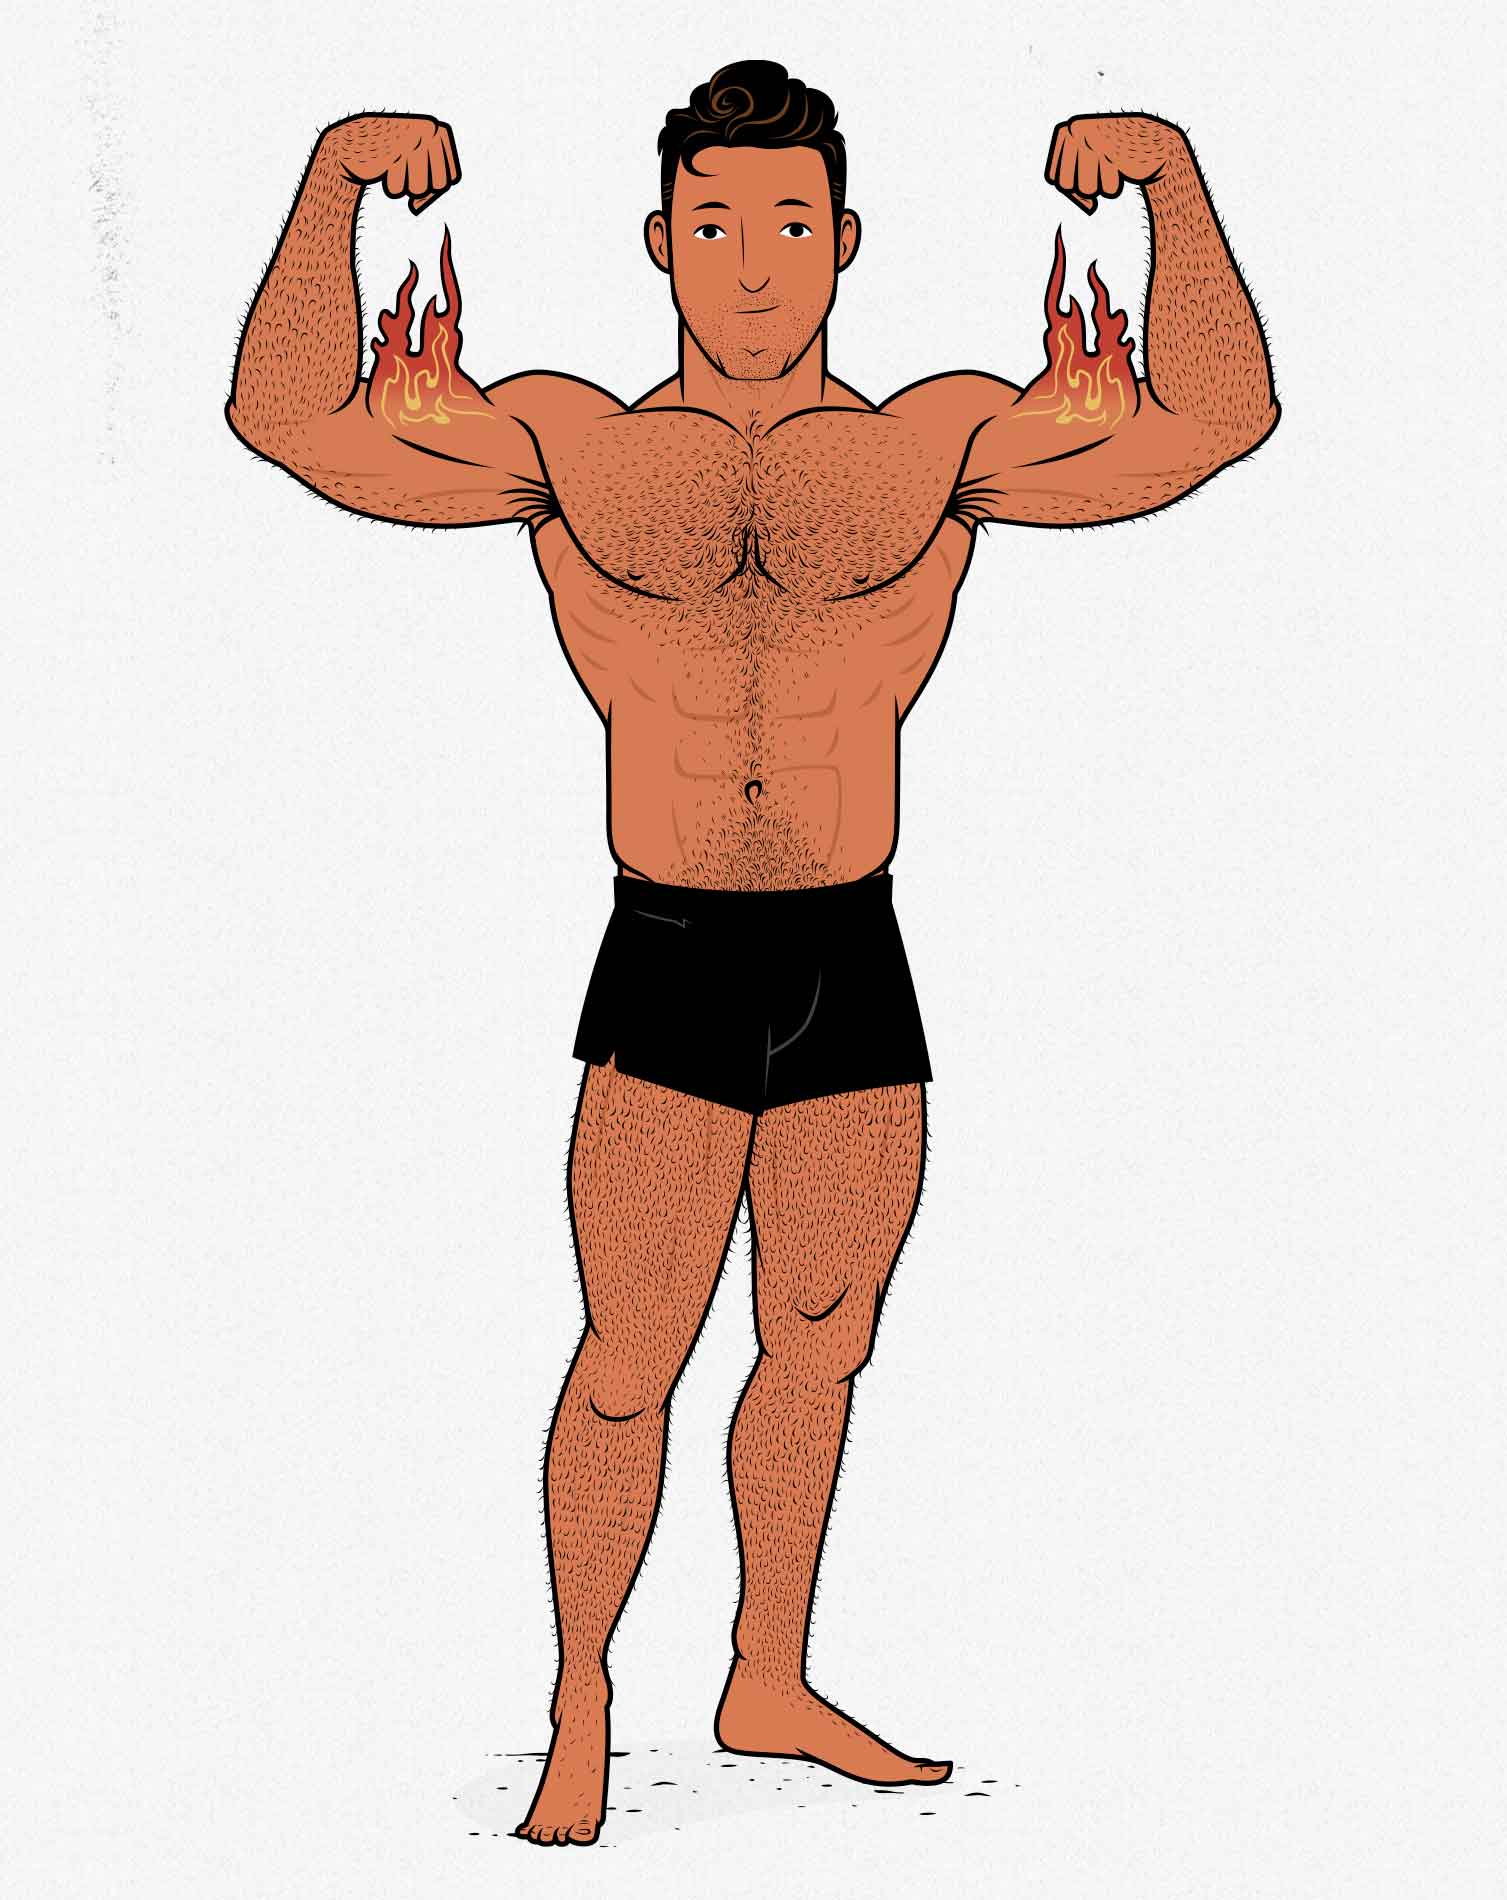 Illustration showing a bodybuilder flexing his arms.